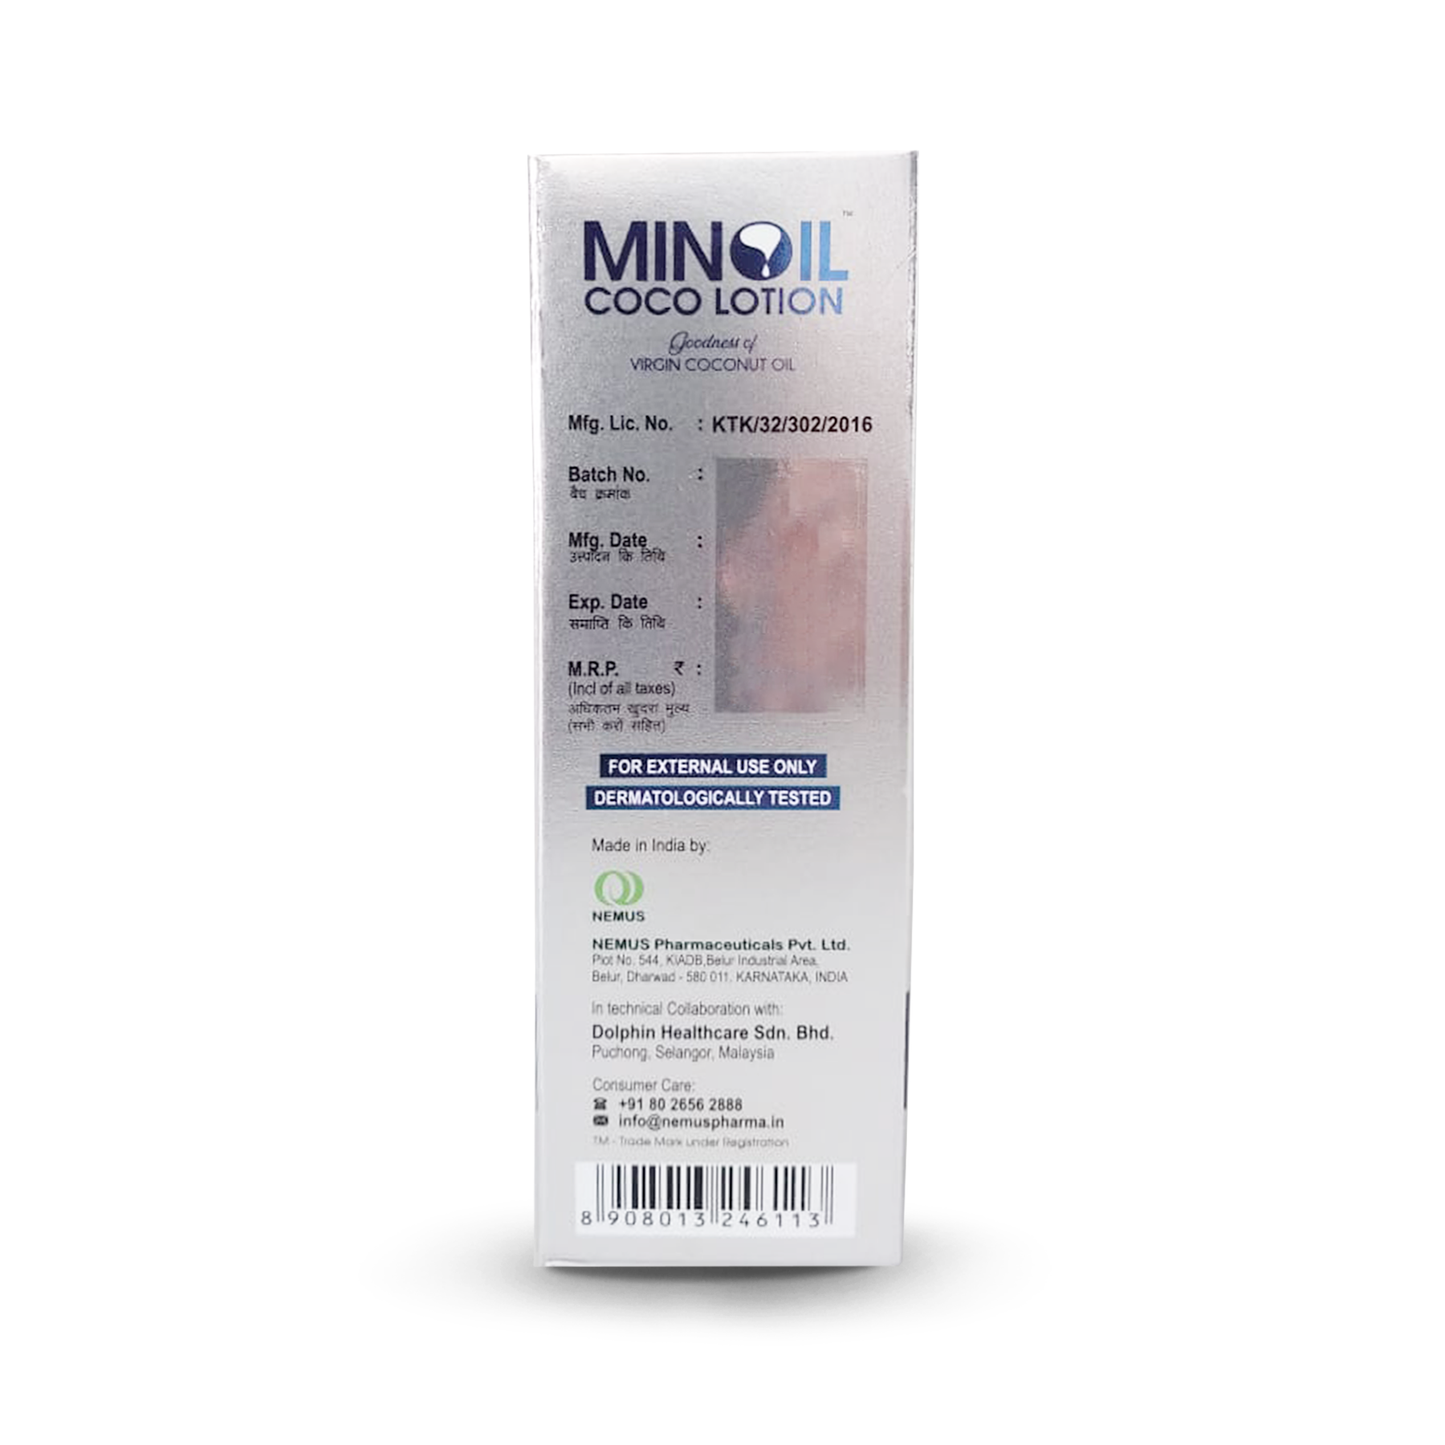 Minoil Coco Lotion, 100gm (Rs. 3.9/gm)